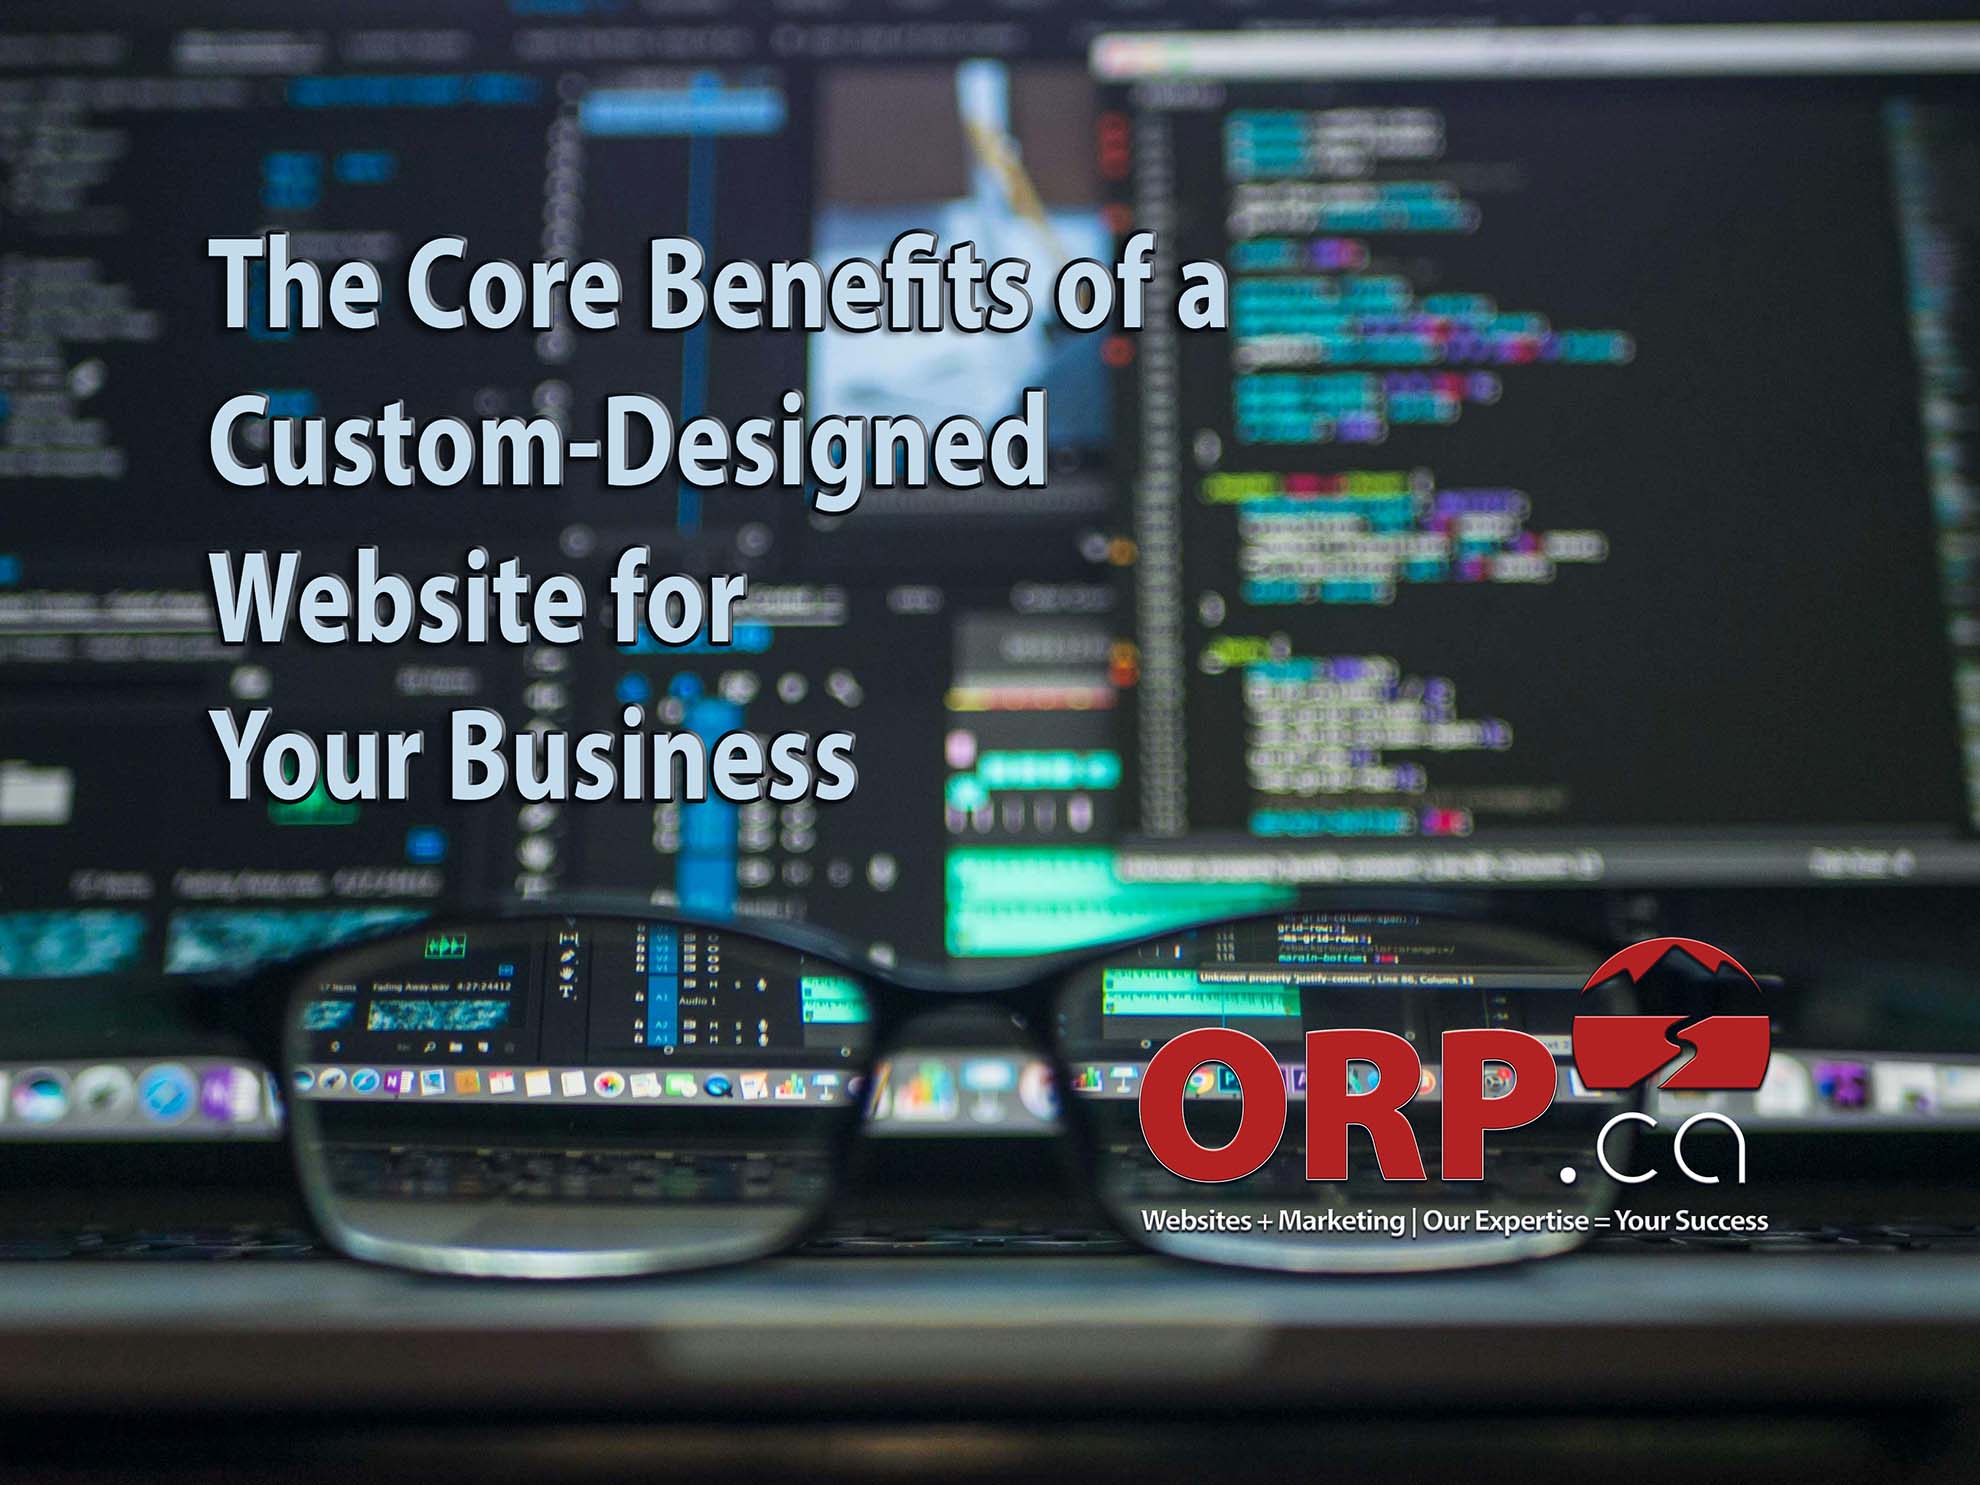 The Core Benefits of a Custom Designed Website for Your Business - a small business website and content marketing article provided by the Team @ ORP.ca | Experienced Website Design and Development, Copywriting and Digital Marketing Services